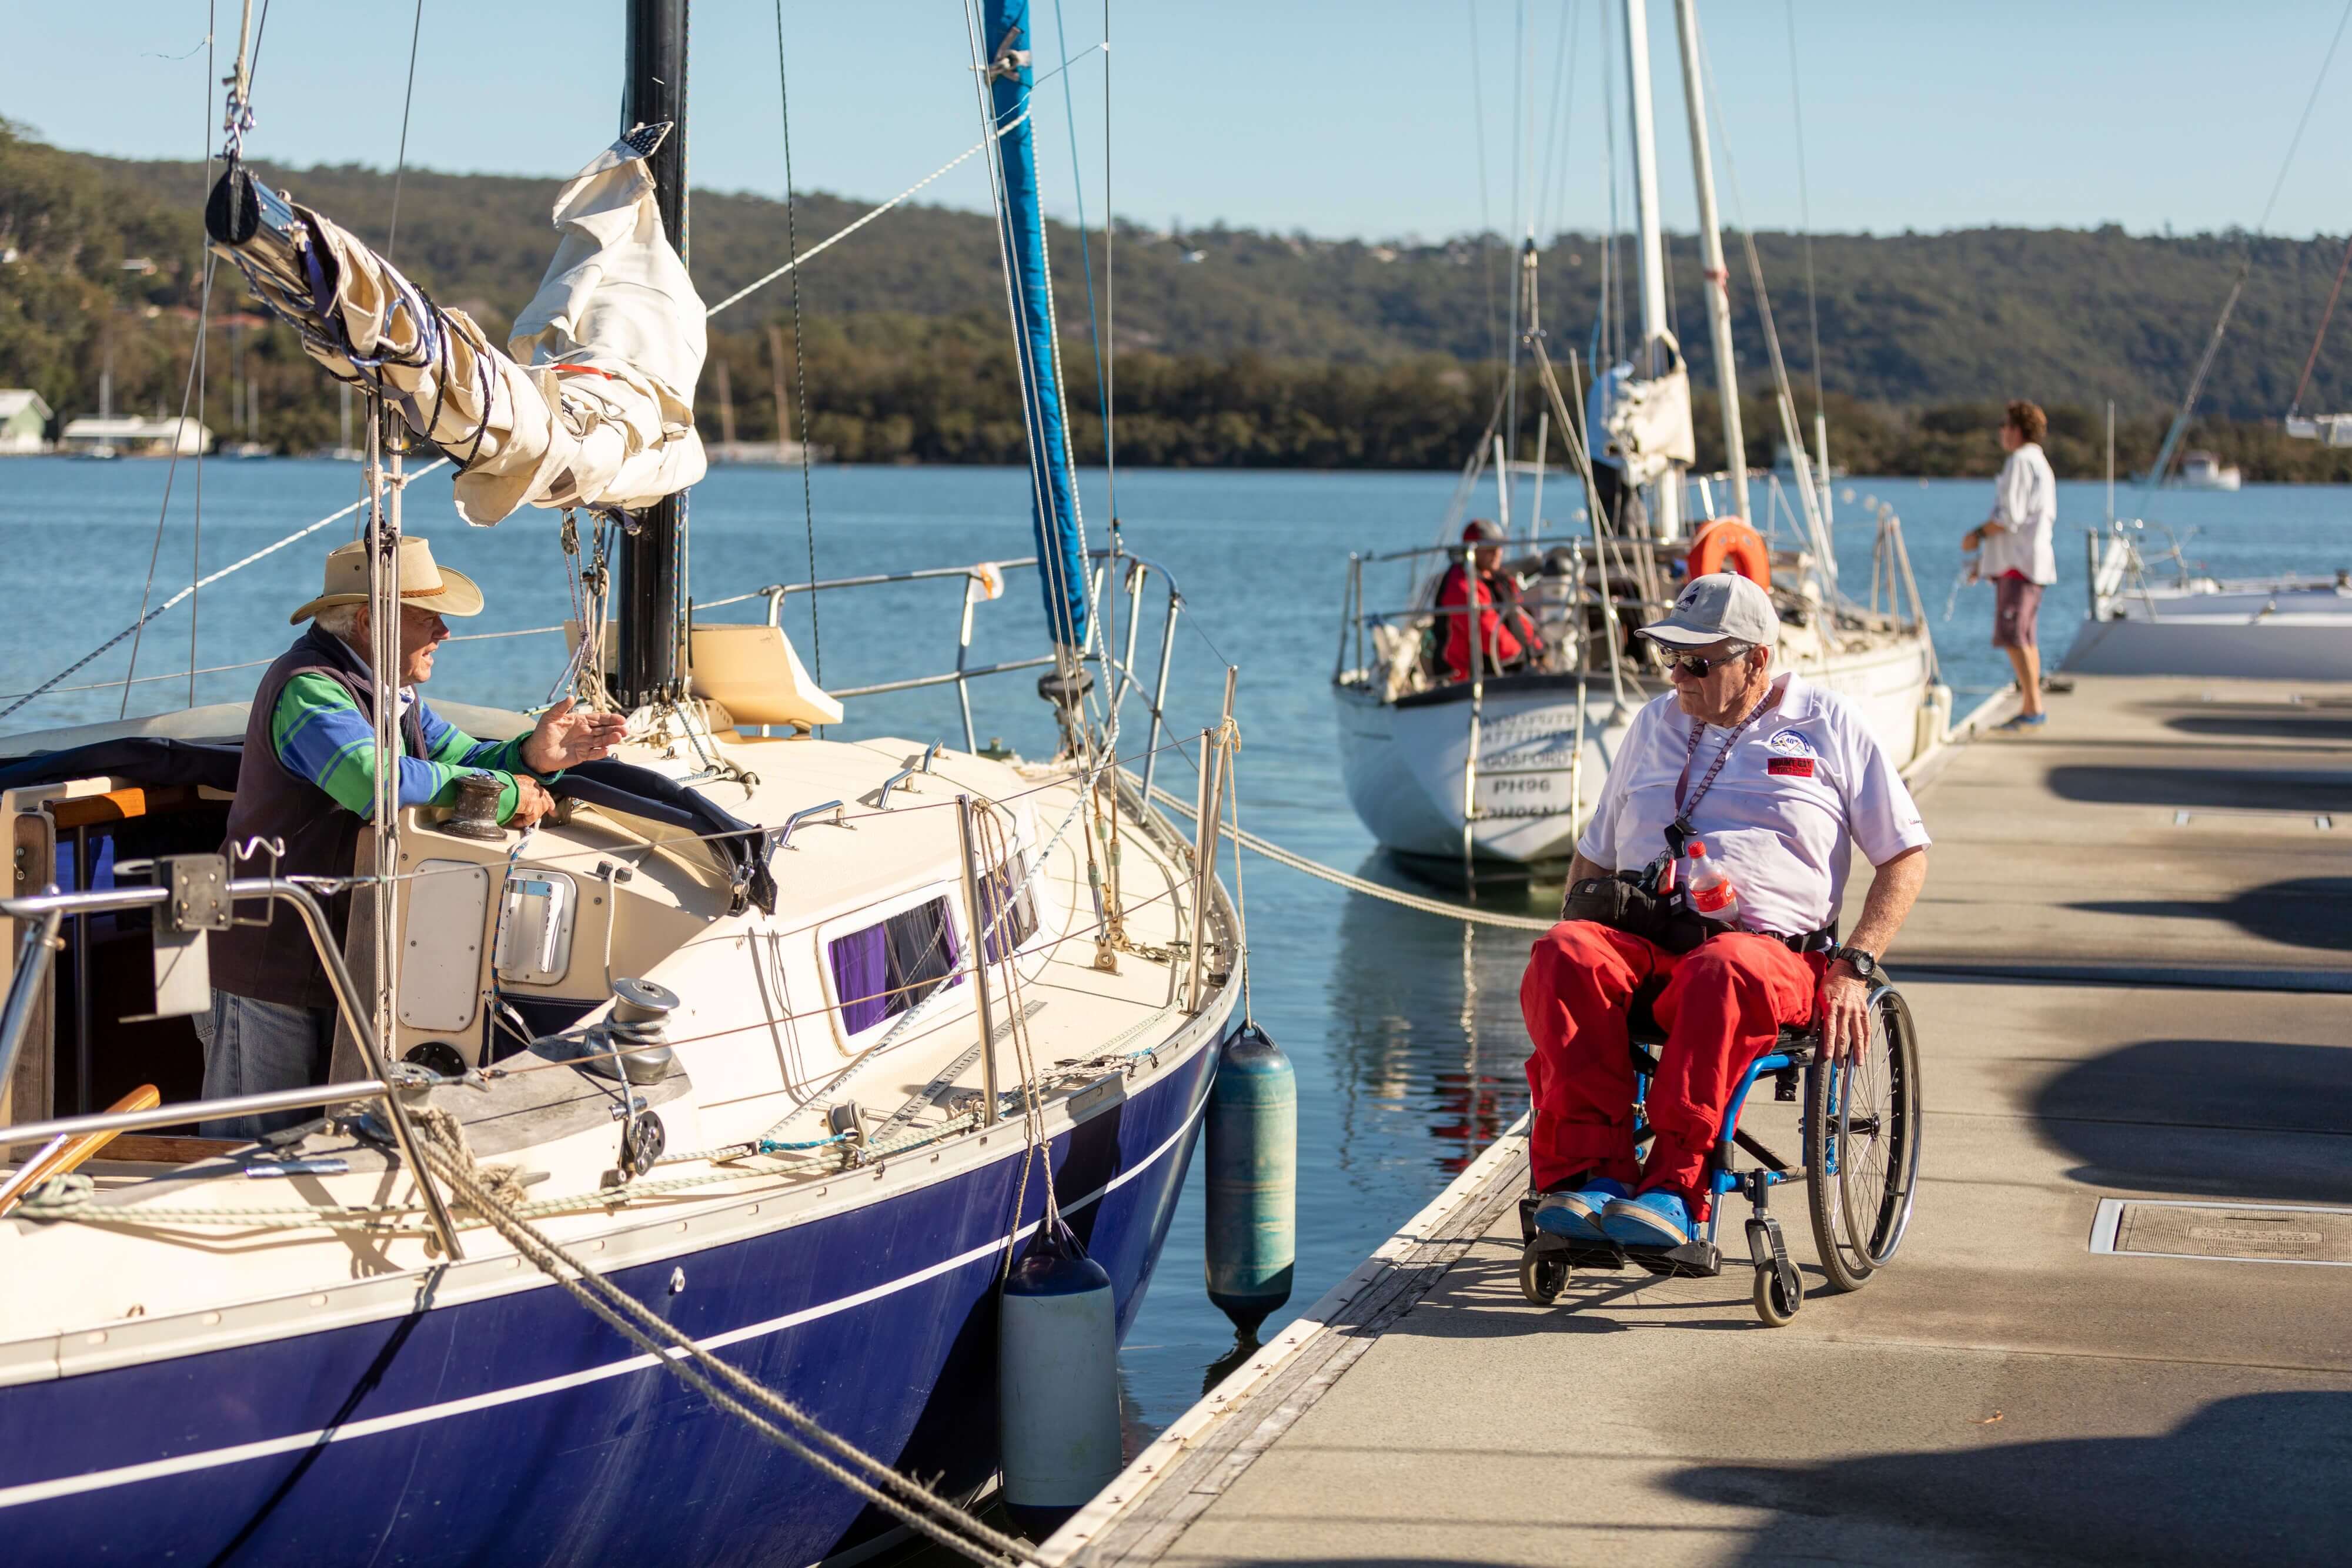 Person in wheelchair on the marina talking to person on Yacht at Gosford Sailing Club 